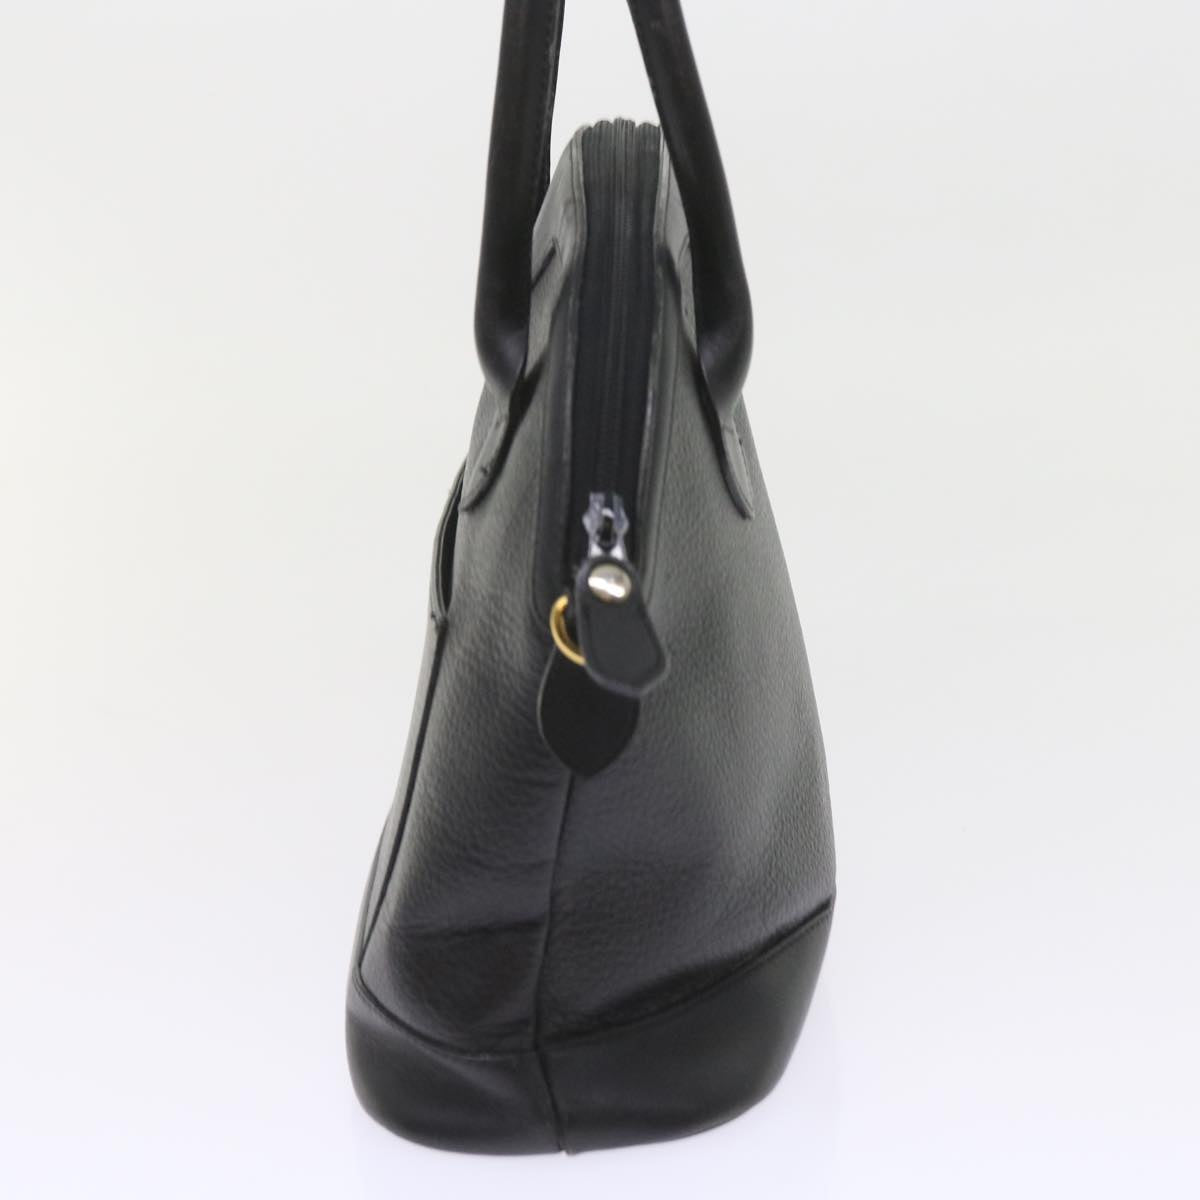 Burberrys Hand Bag Leather Black Auth ep2485